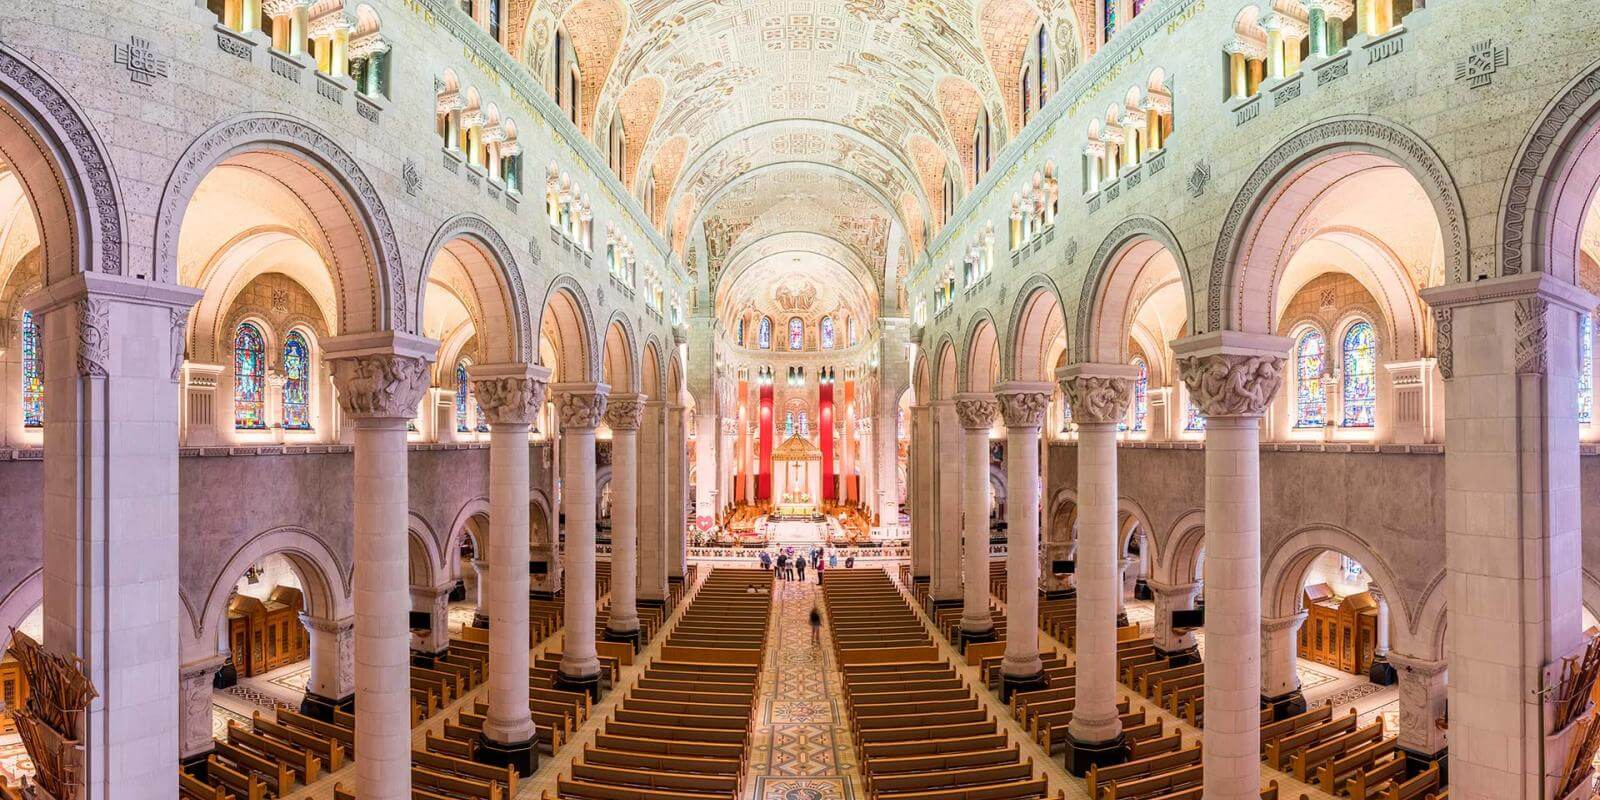 Impressive view of the interior of the Sanctuary of Sainte-Anne-de-Beaupré with its columns and detailed ceiling.